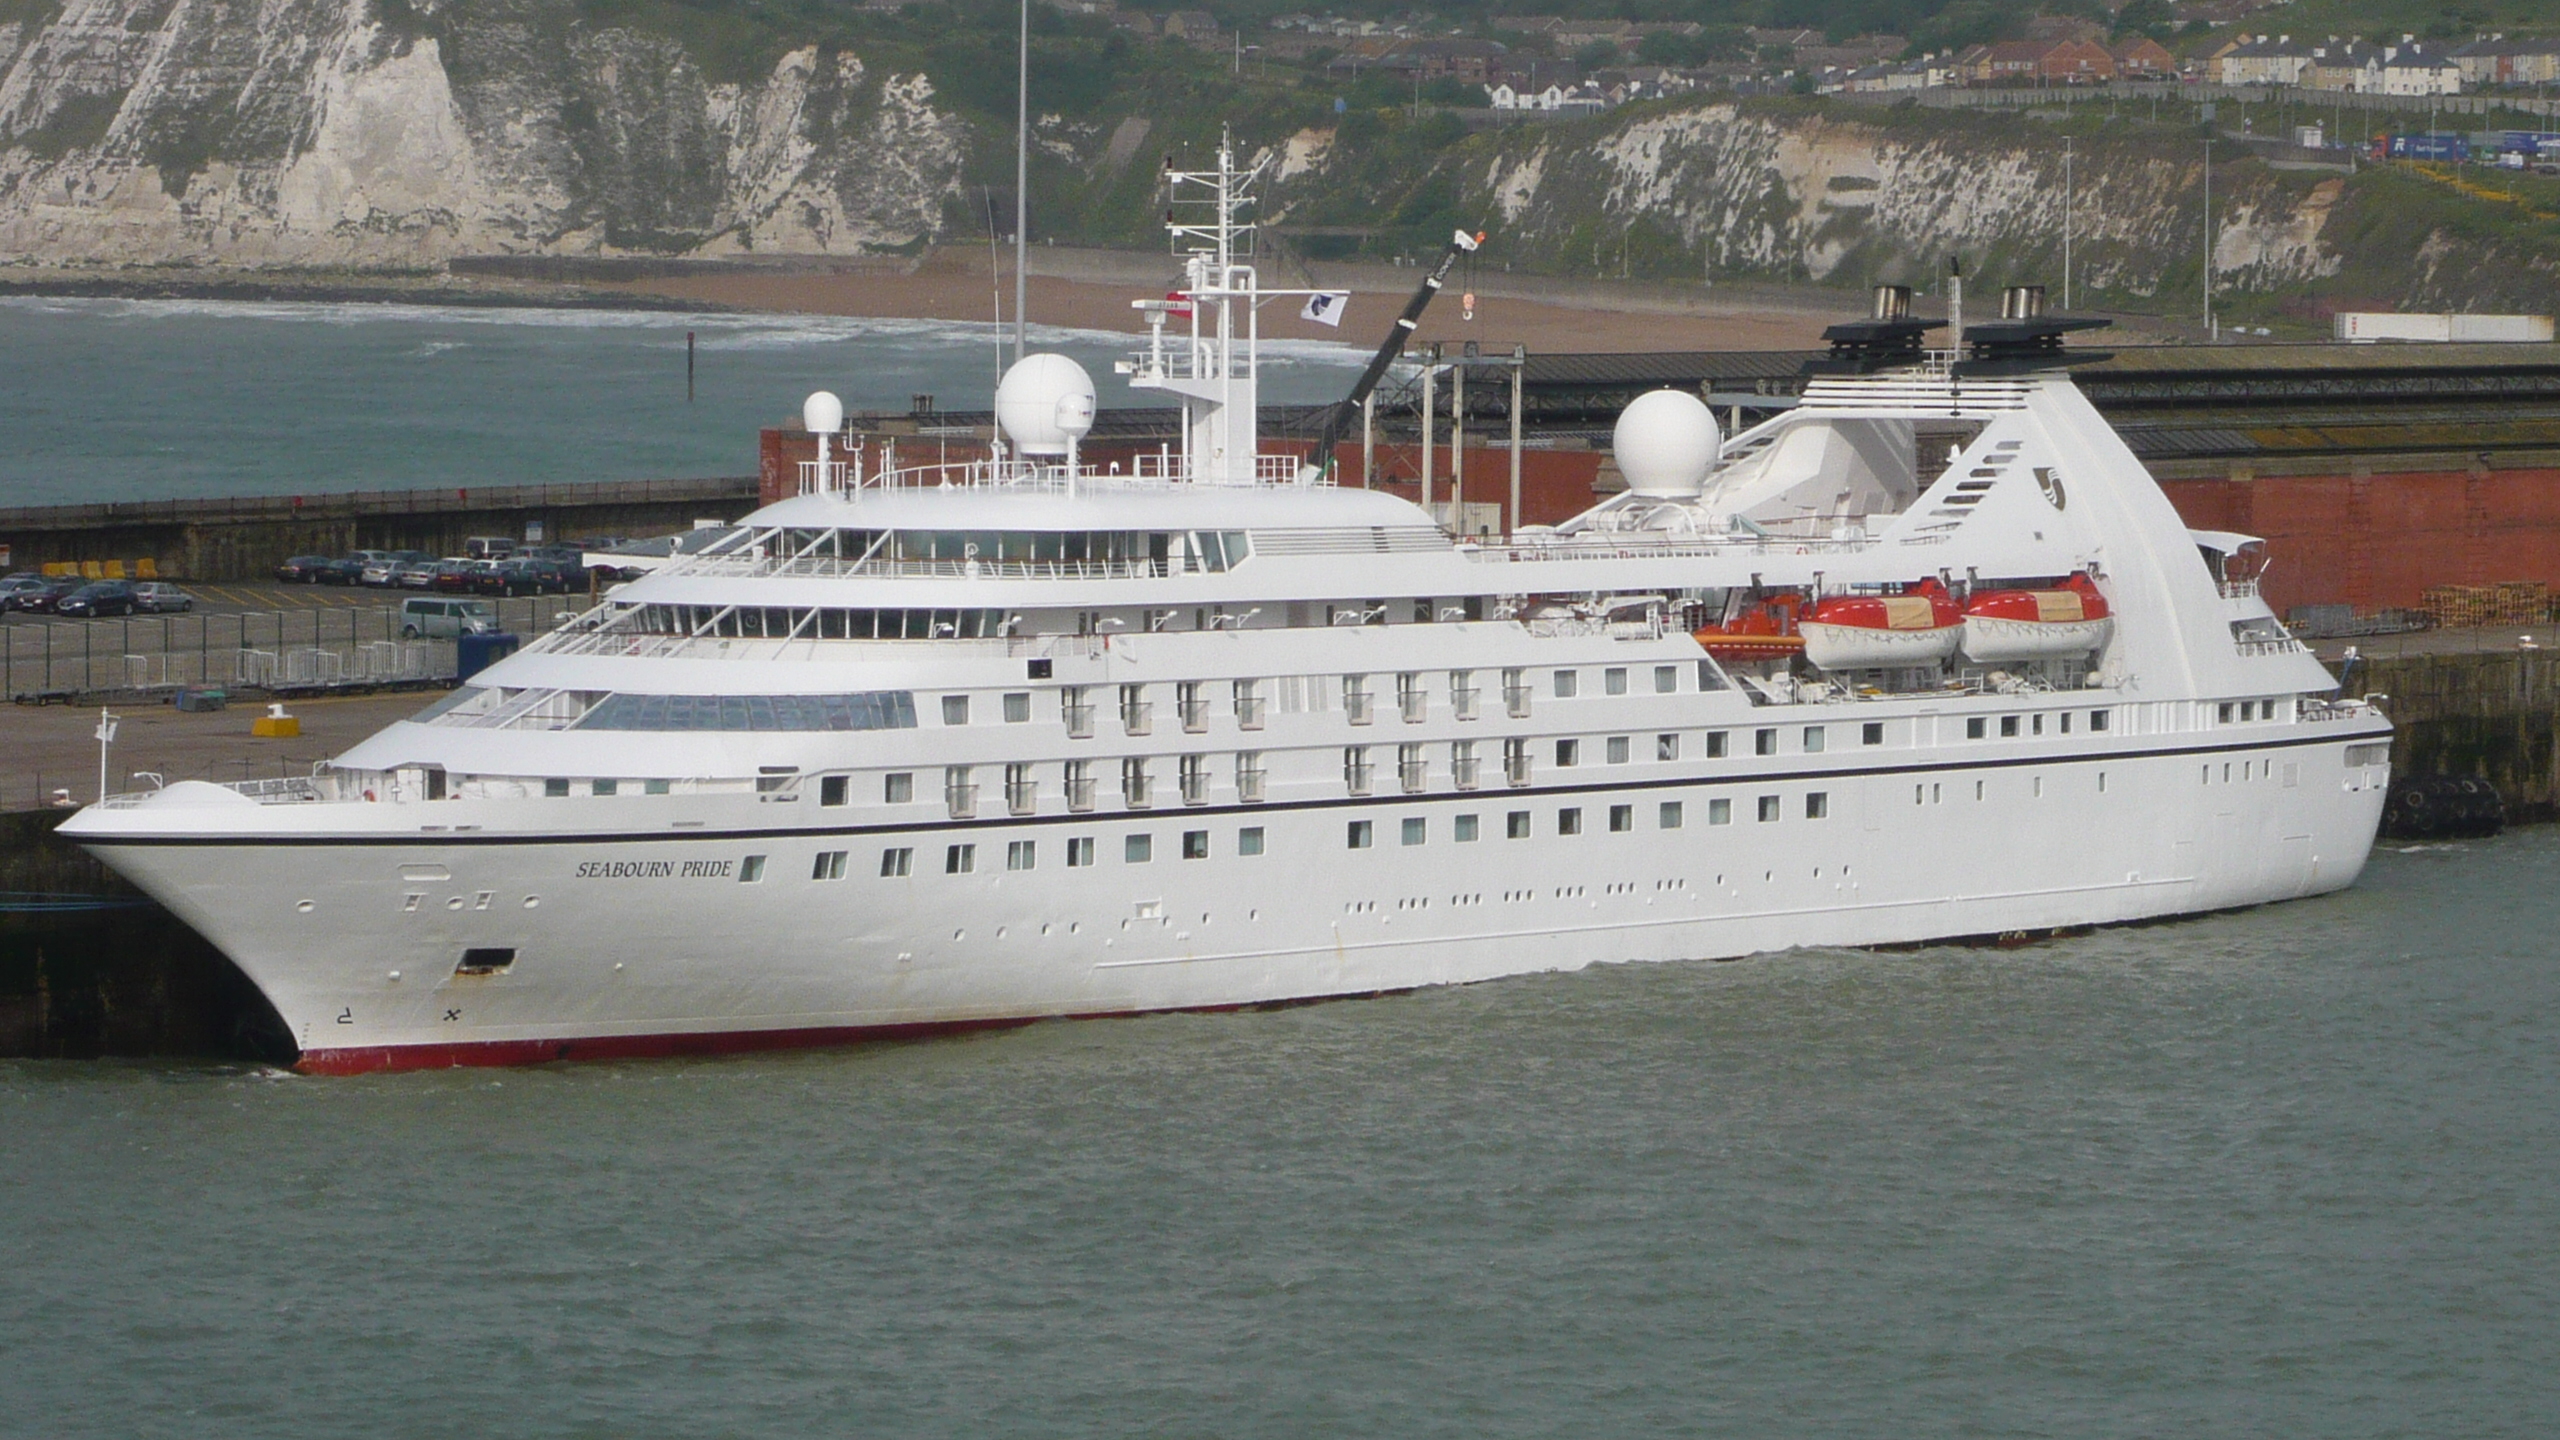 a large white cruise ship docked at the port